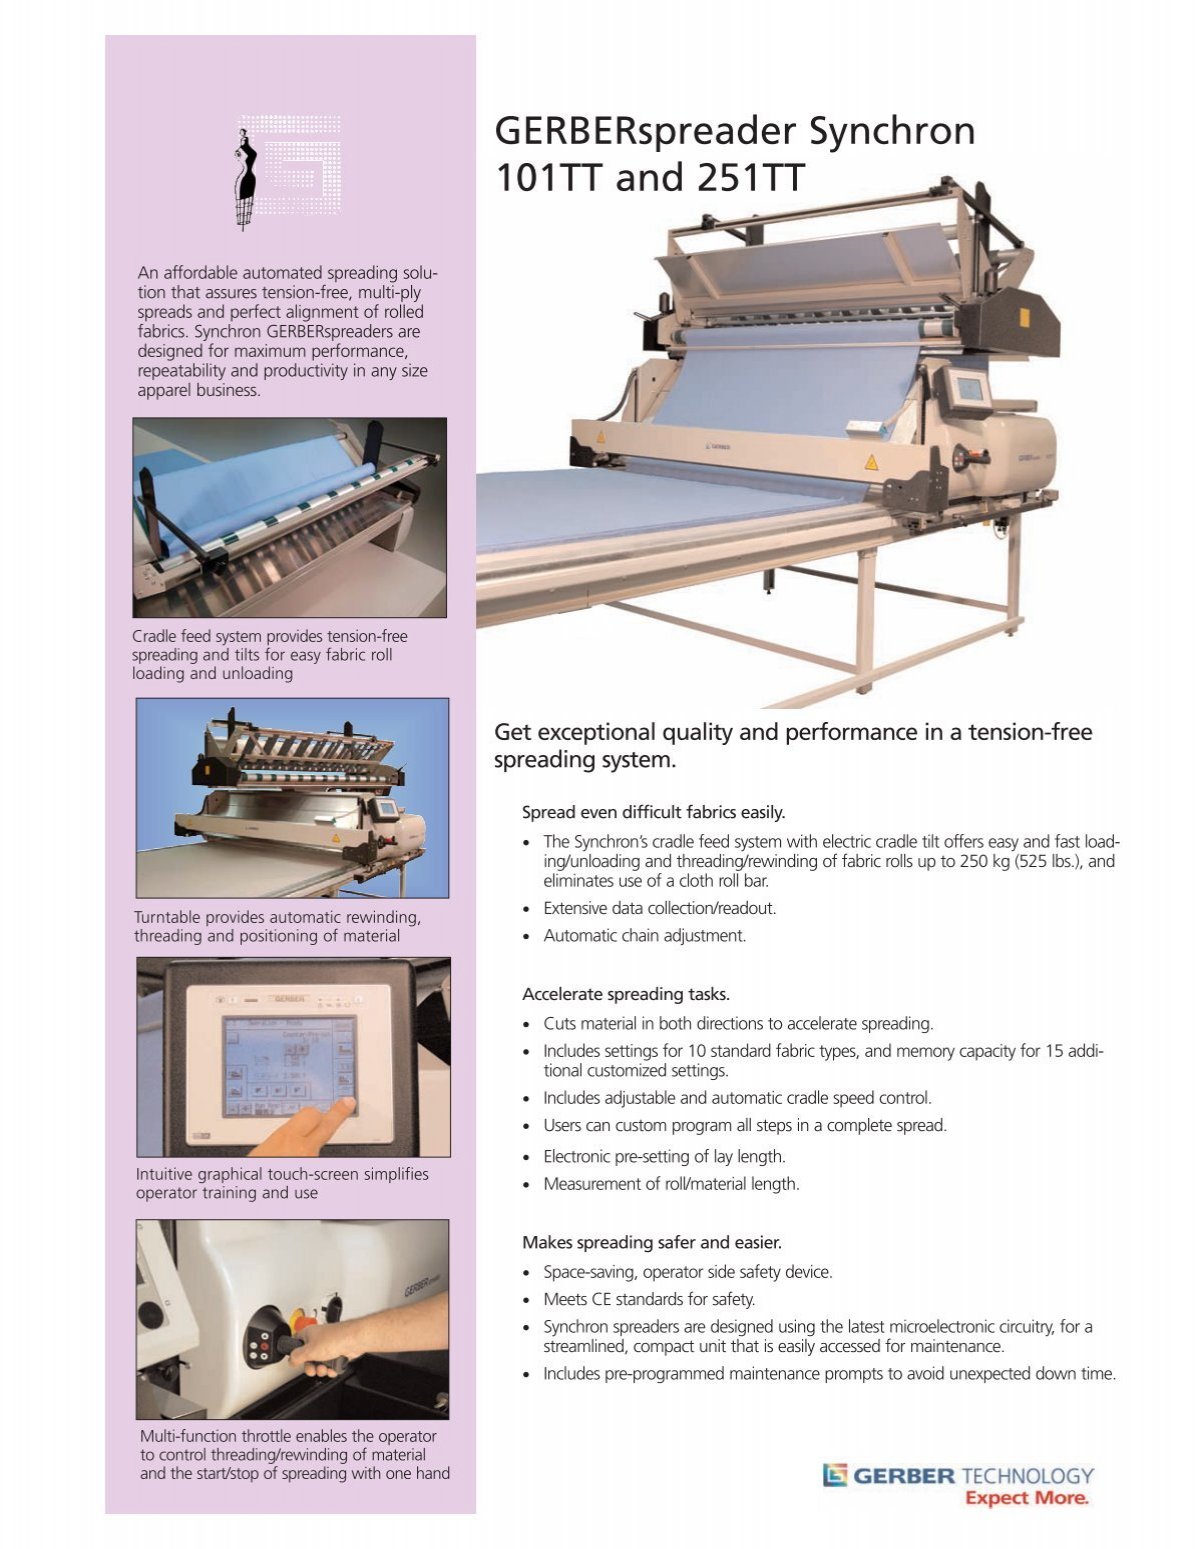 Automatic Fabric Spreading and Fabric Cutting machine //Gerber Fabric  cutter machine/Lay cutting m/c 